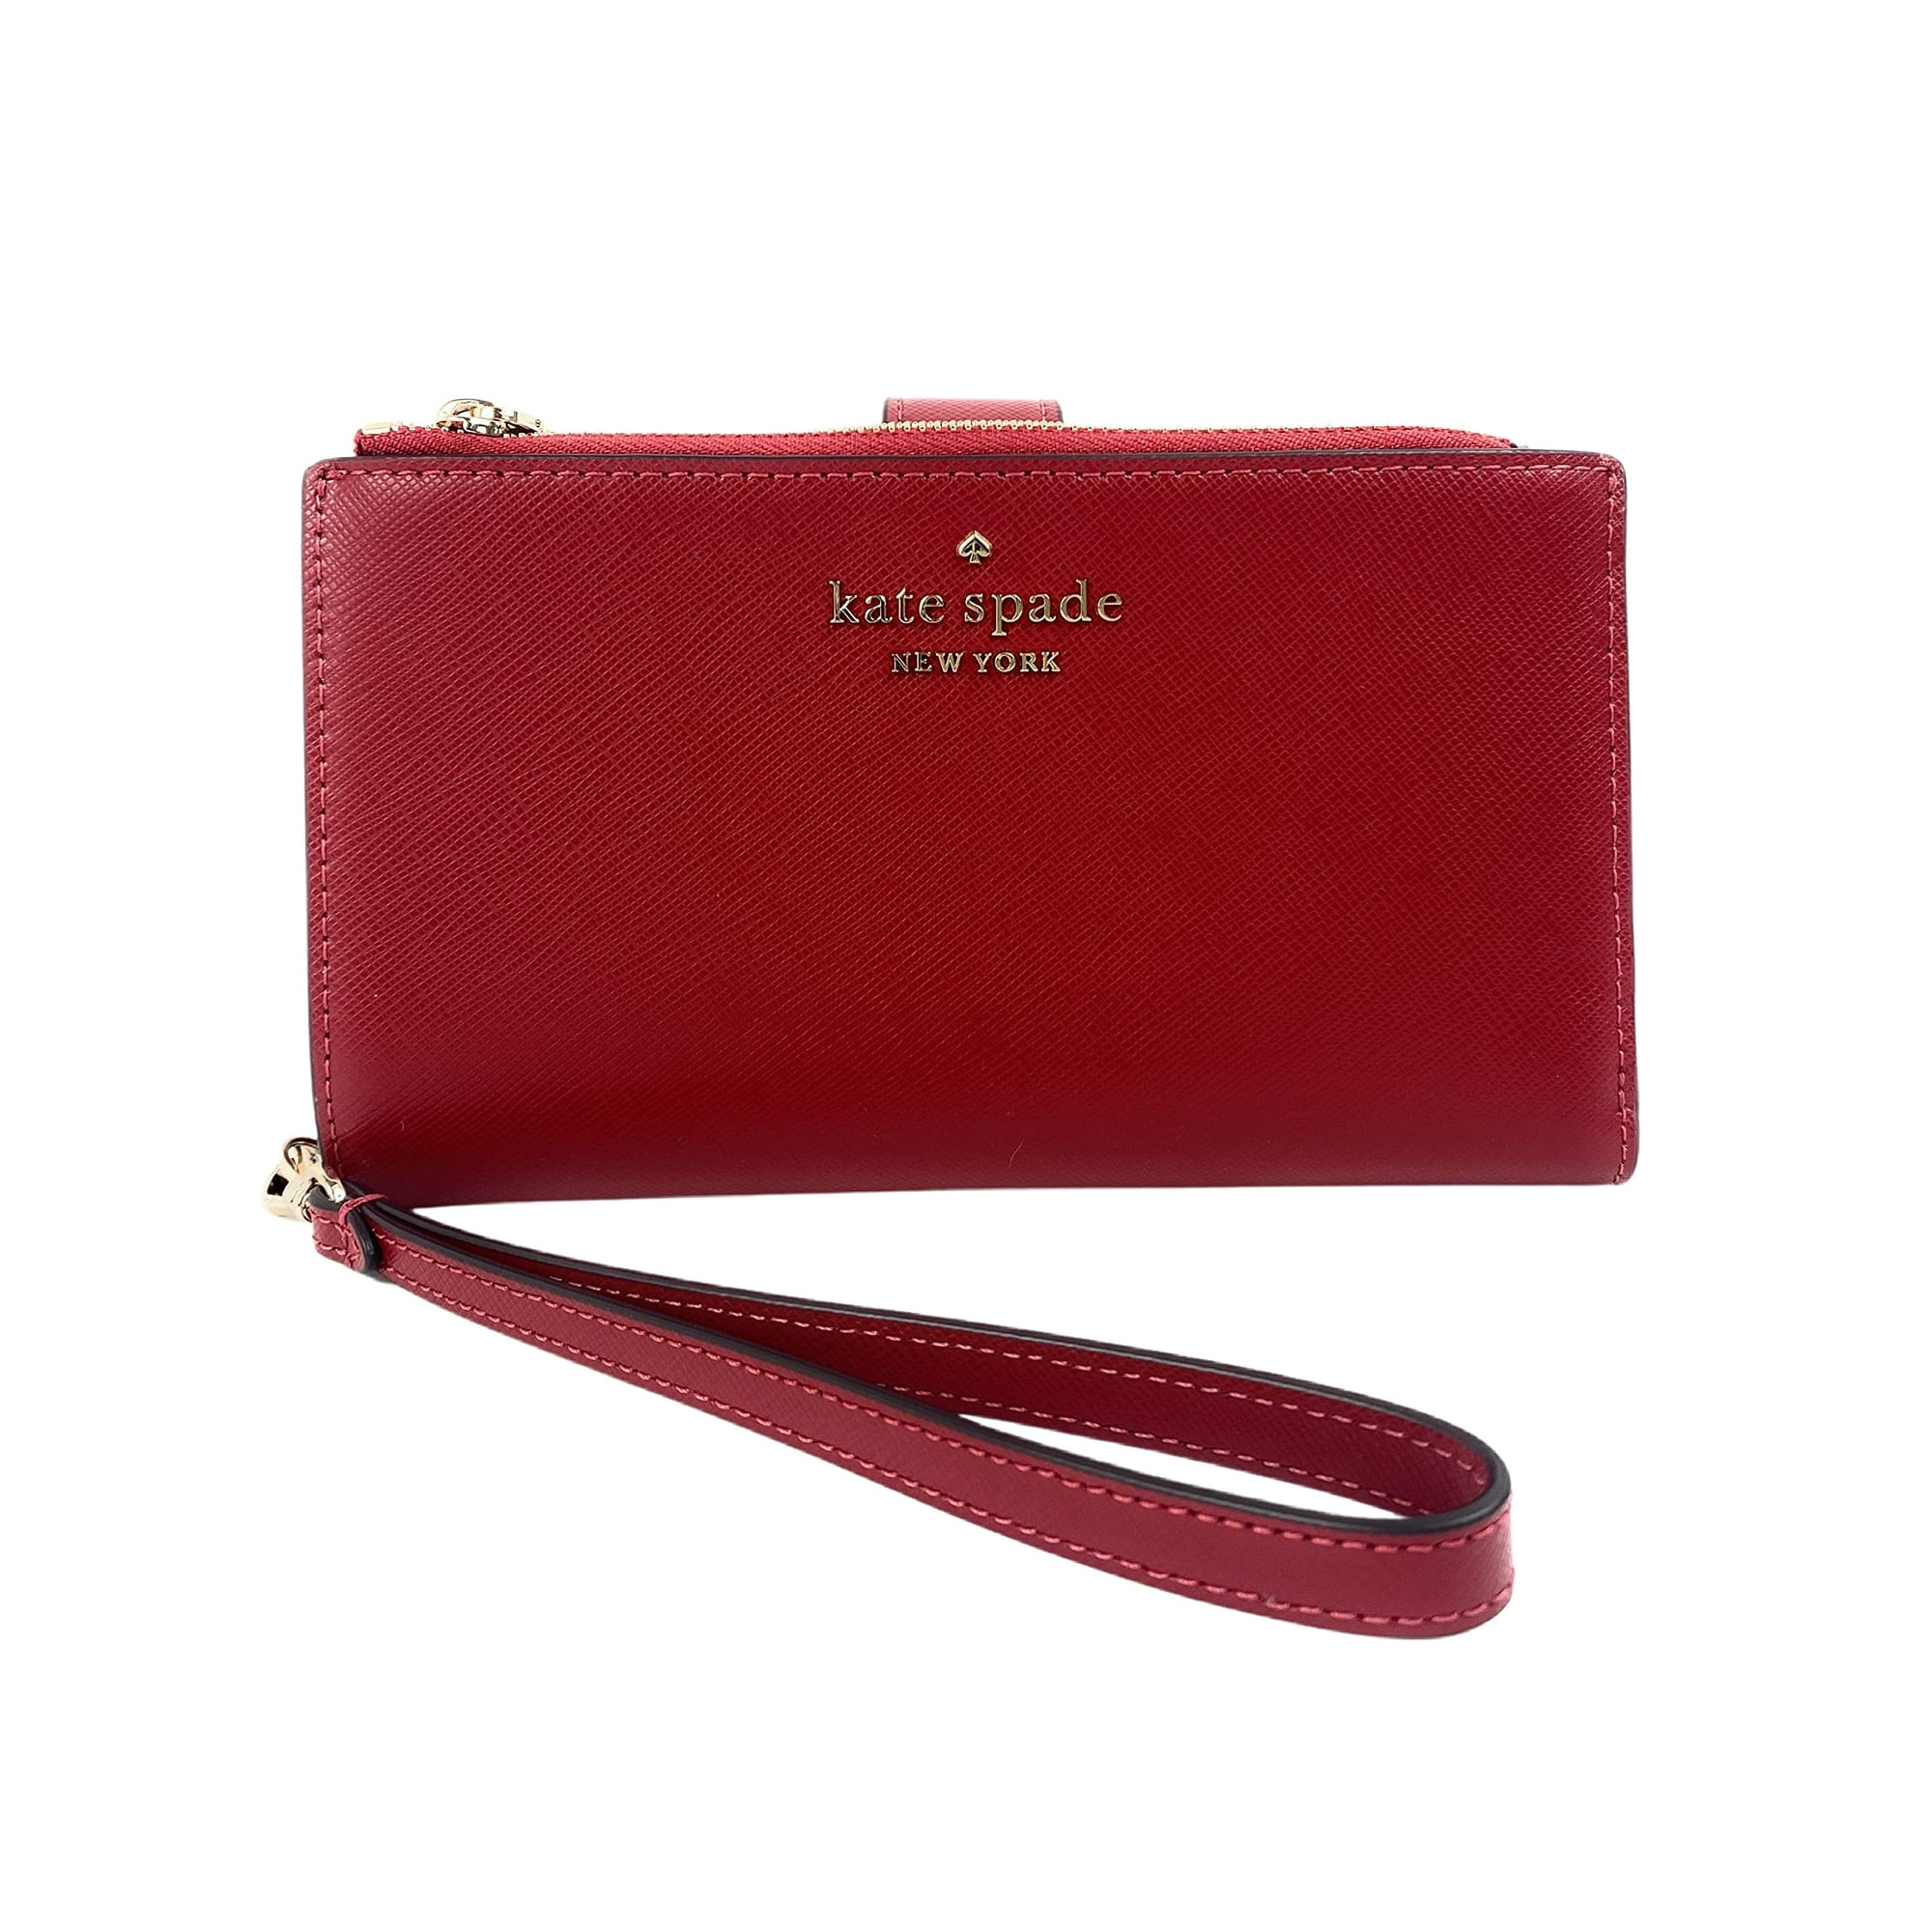 Kate Spade New York Staci Wallet Wristlet in Saffiano Leather Red Currant |  Walmart Canada